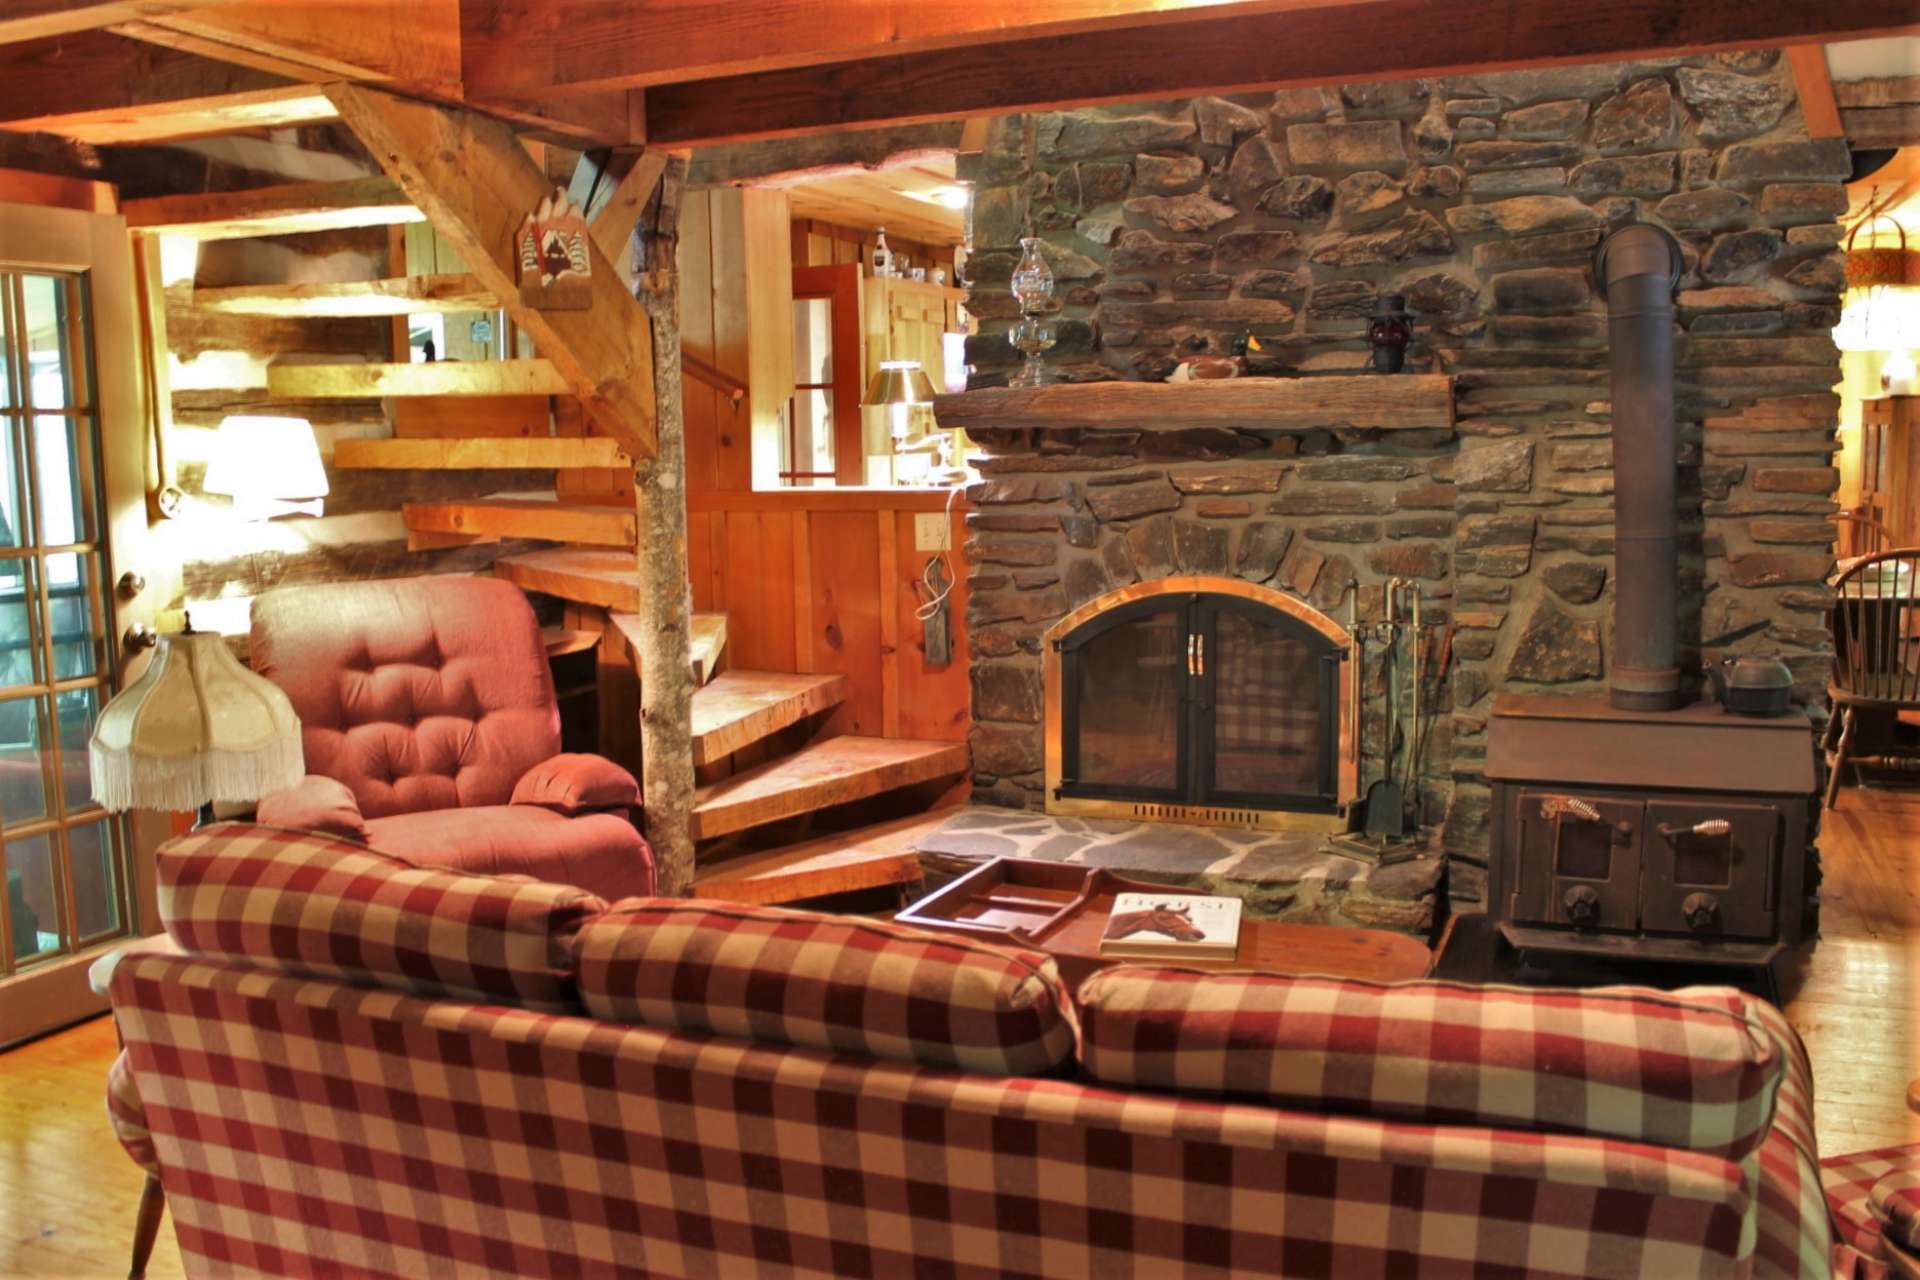 Choose either the native stone wood-burning fireplace that reaches up to the raised ceiling or the more efficient wood burning stove to heat the cabin during cold winter nights.